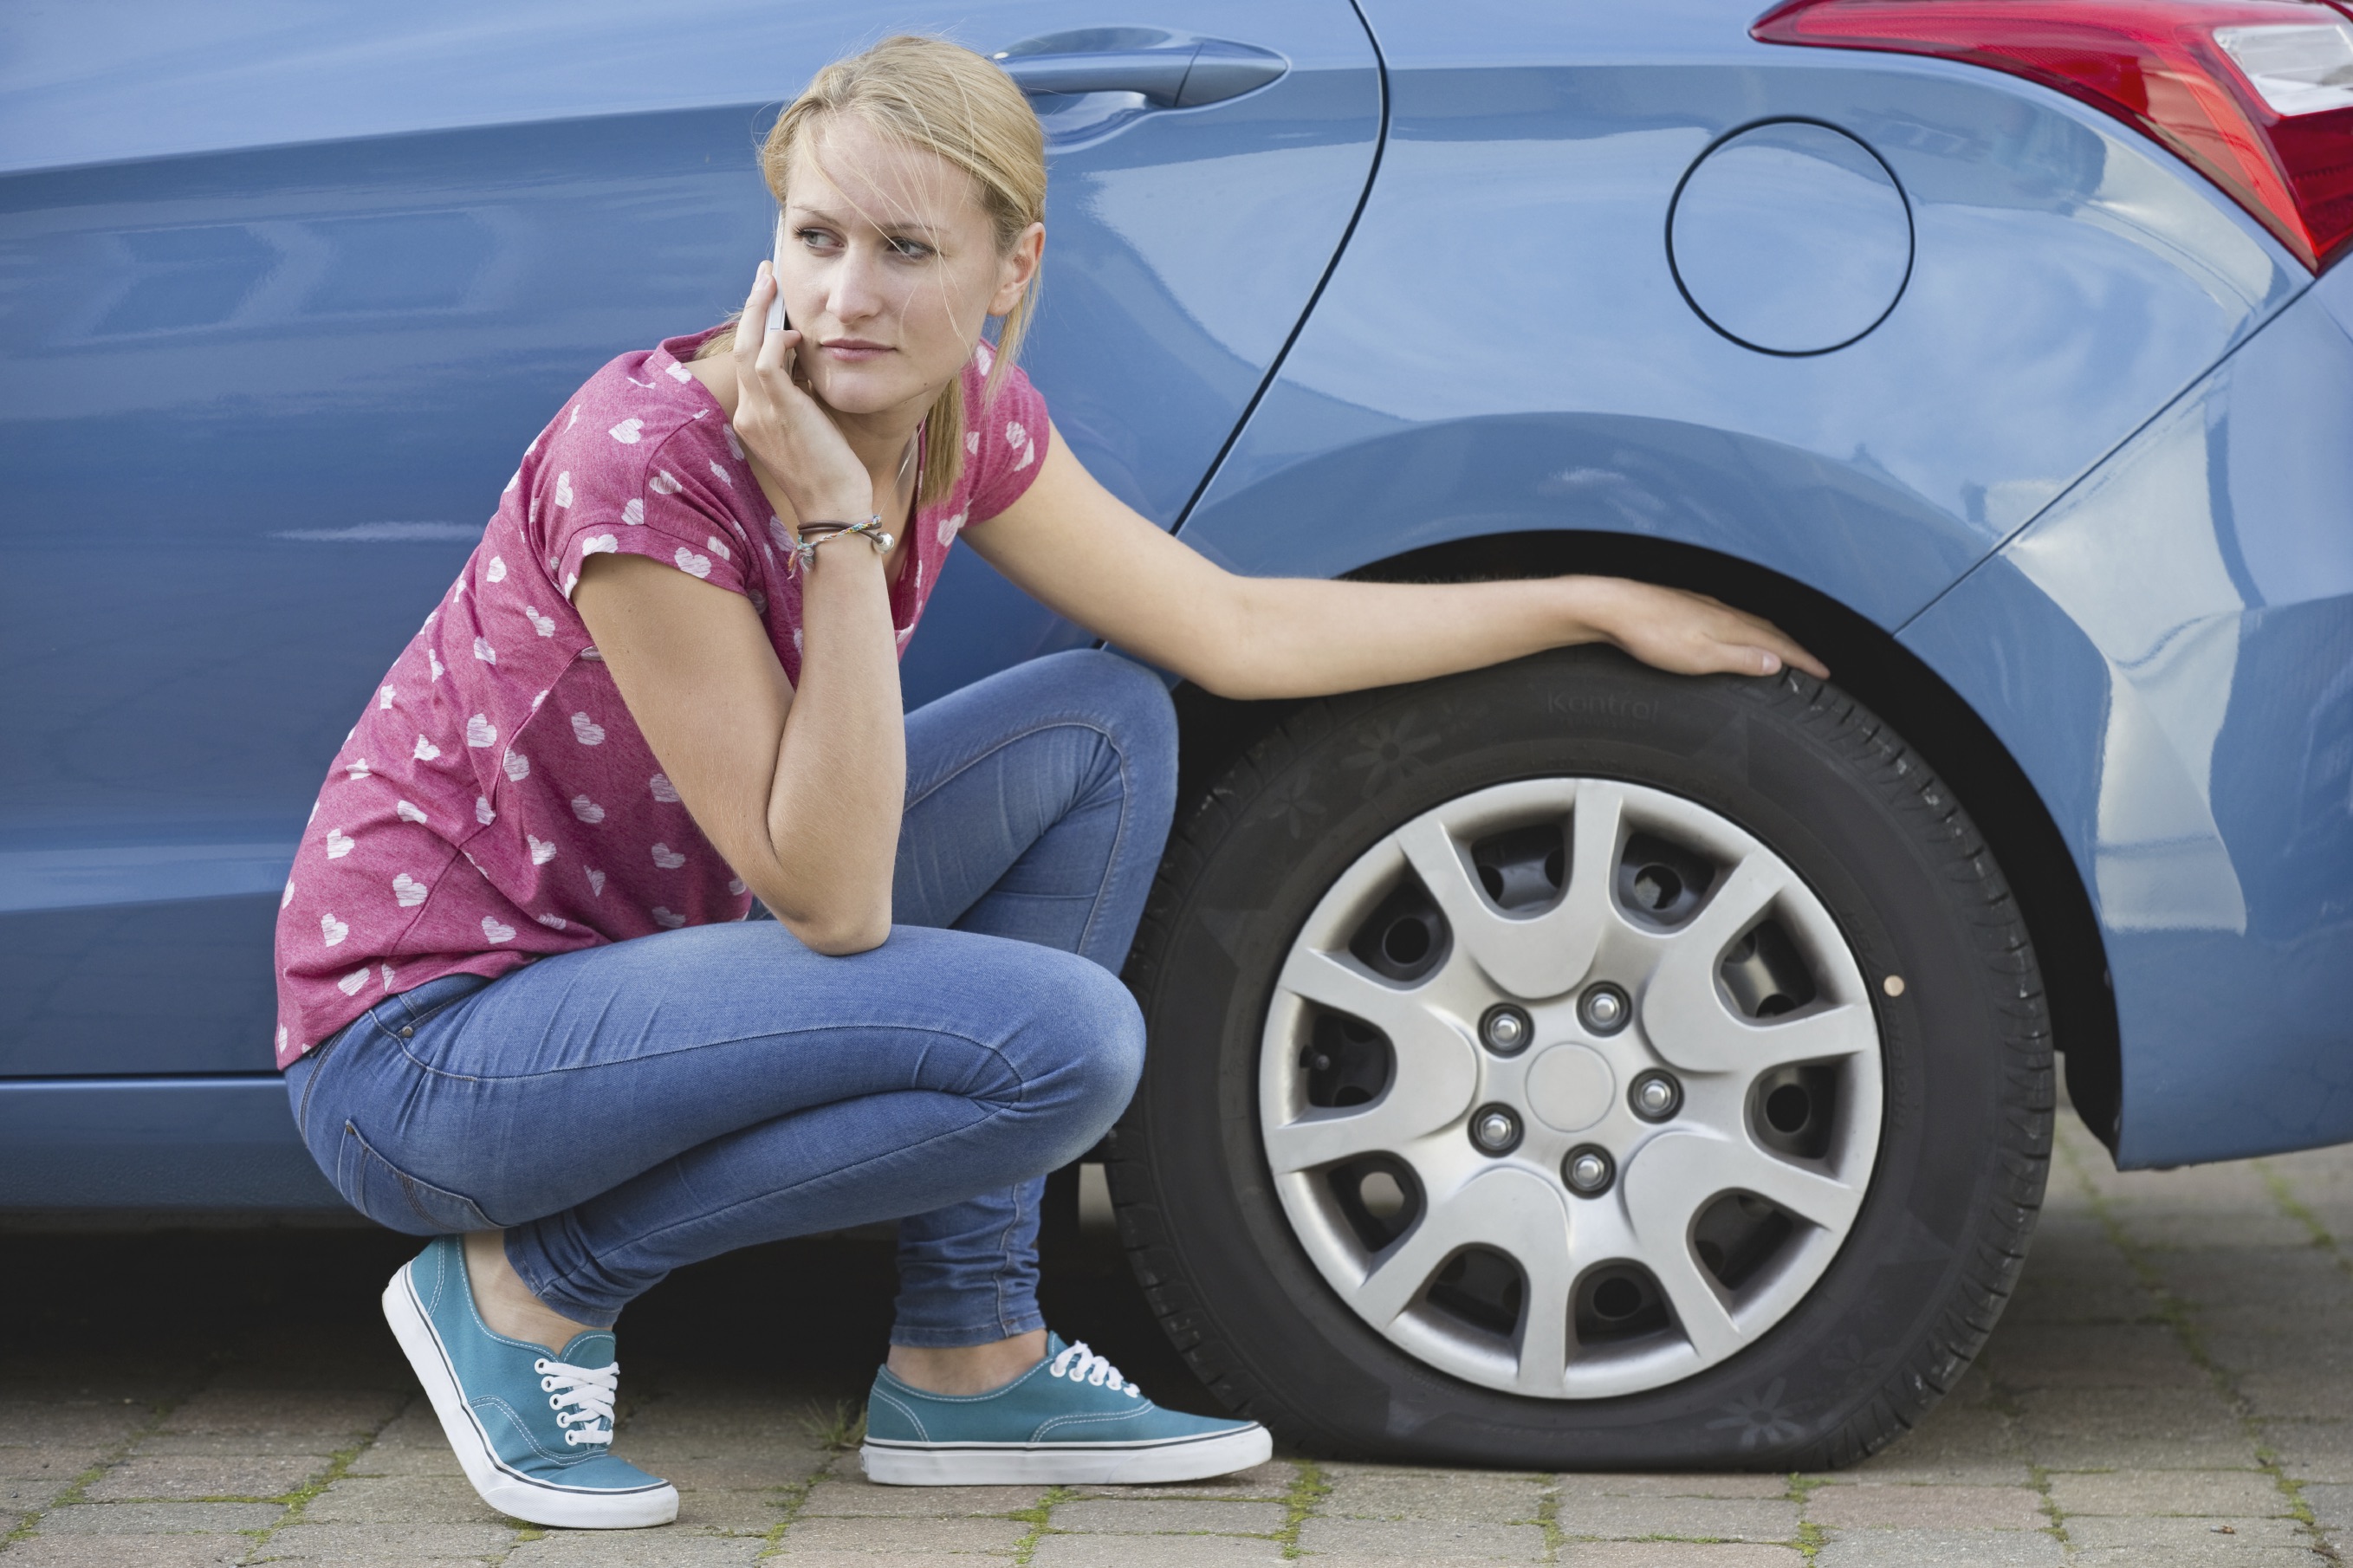 55% of British drivers say they can't change a spare wheel